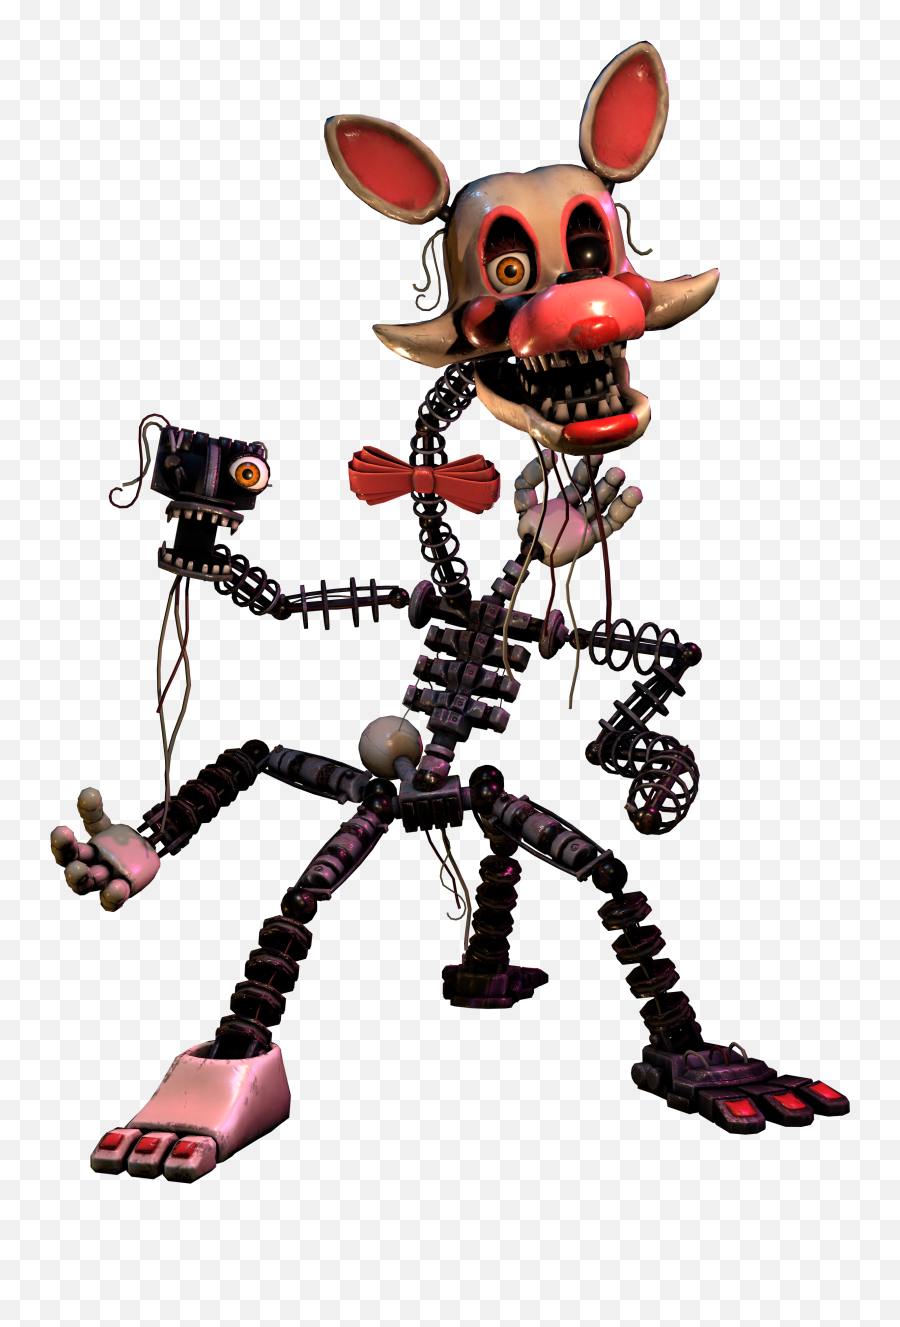 Why Is Mangeld In Fnaf So Ripped Apart Why Does Heshe Have Emoji,Swiggity Swooty Text Emoticon